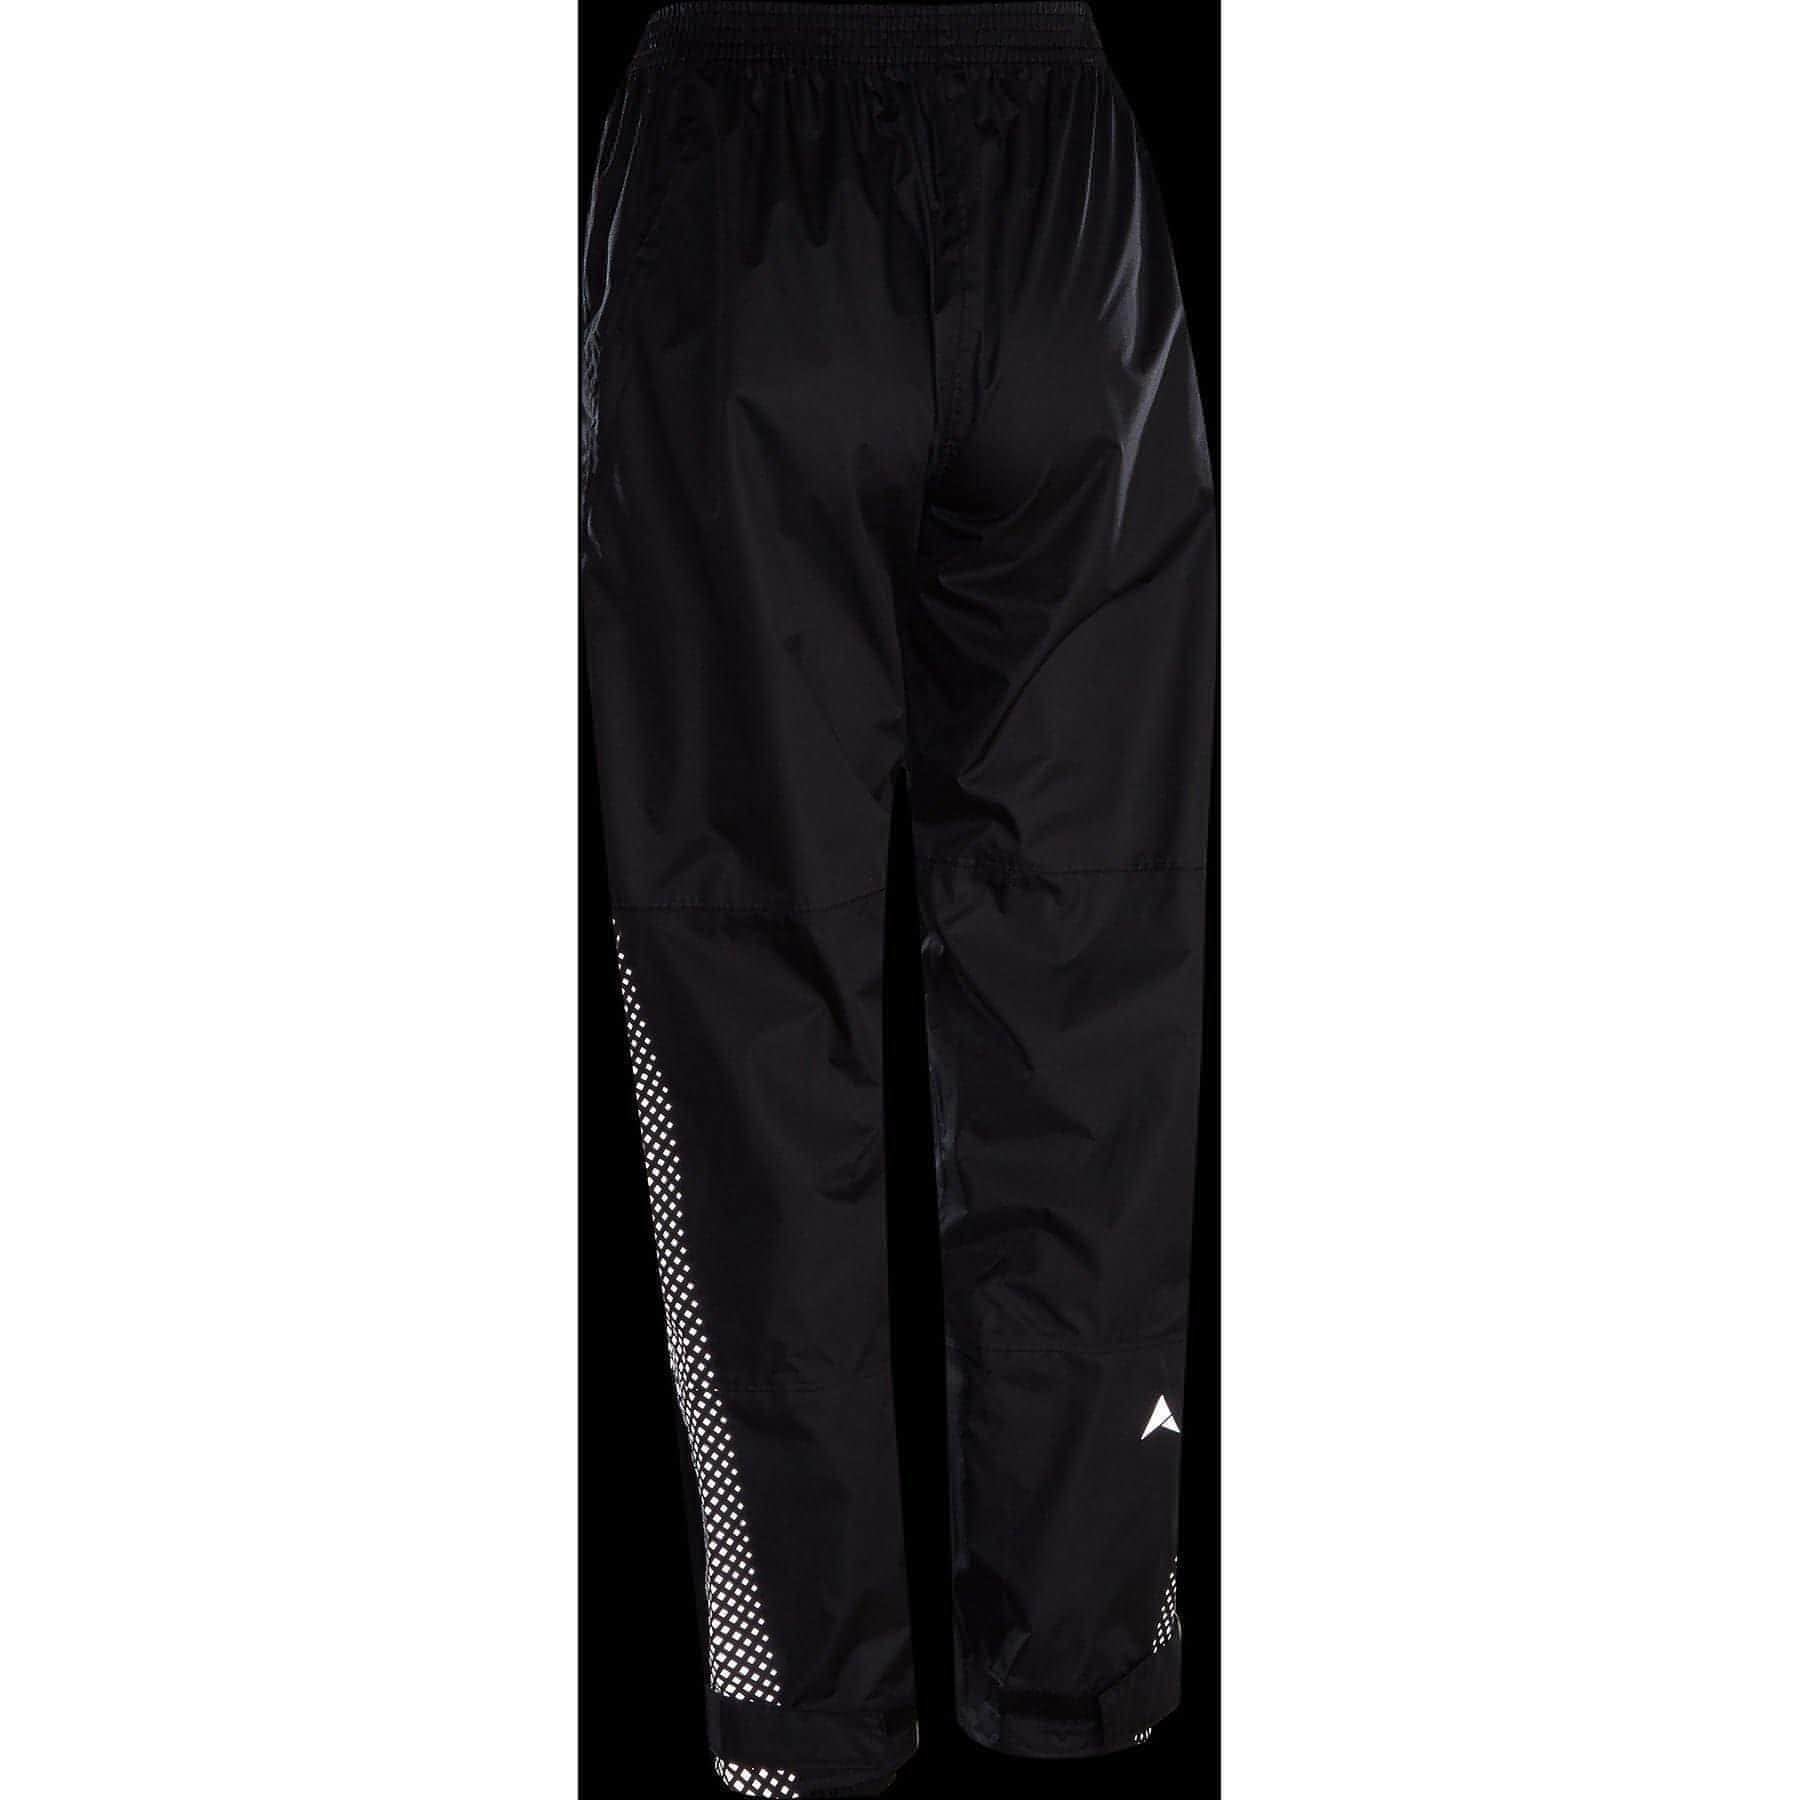 Altura Nightvision Womens Cycling Over Trousers - Black - Start Fitness